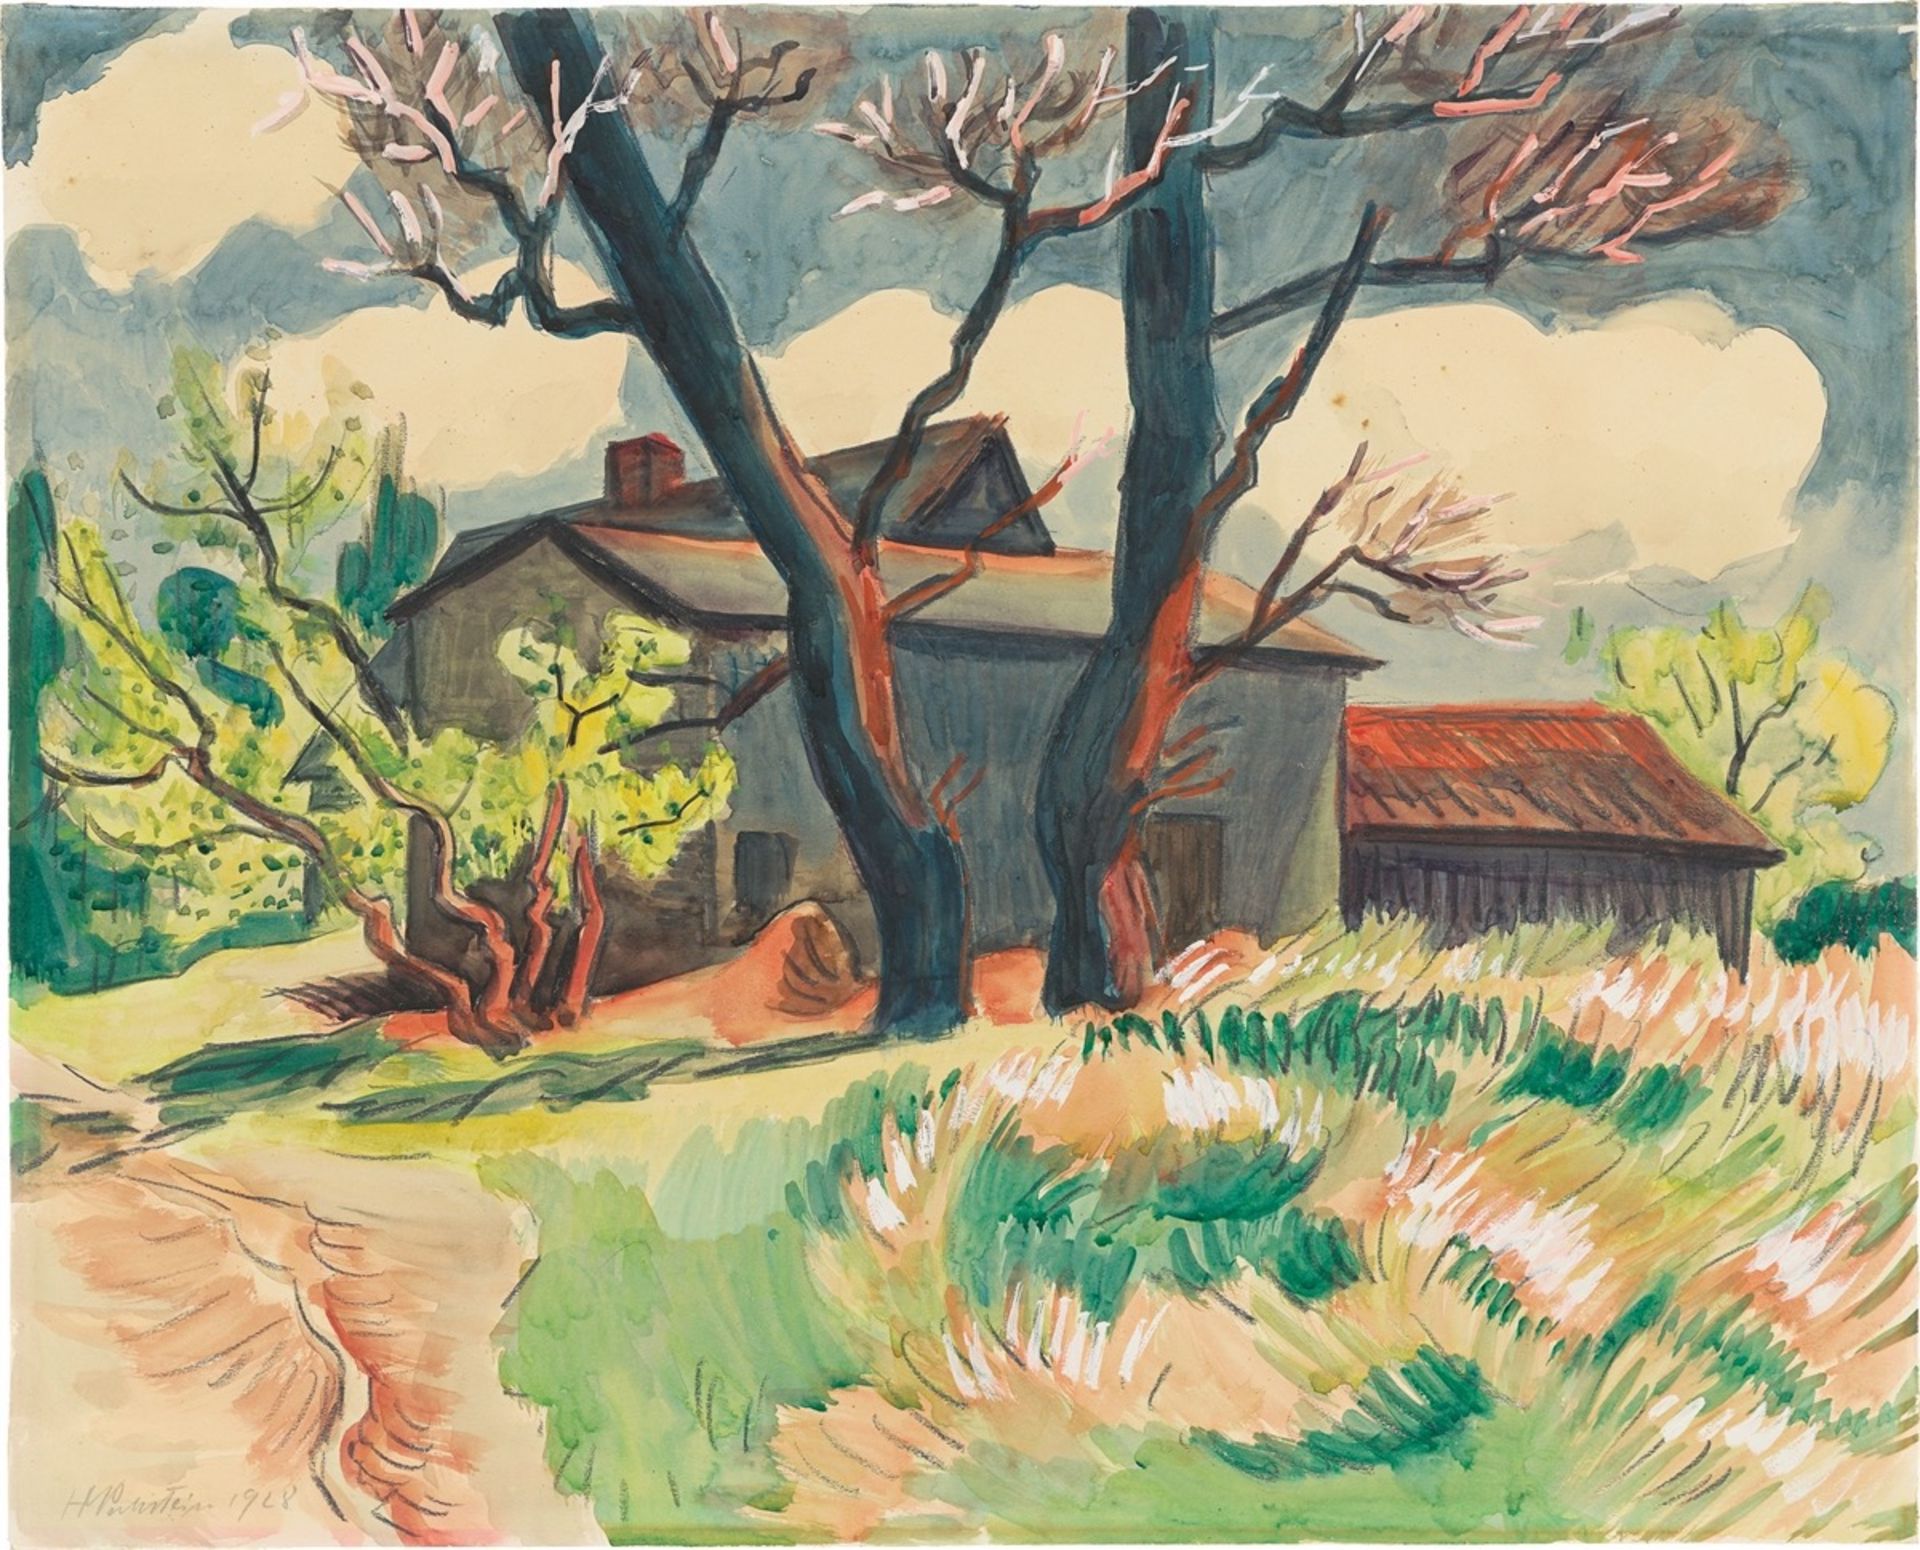 Max Pechstein. Landscape with farm and blossoming trees. 1928